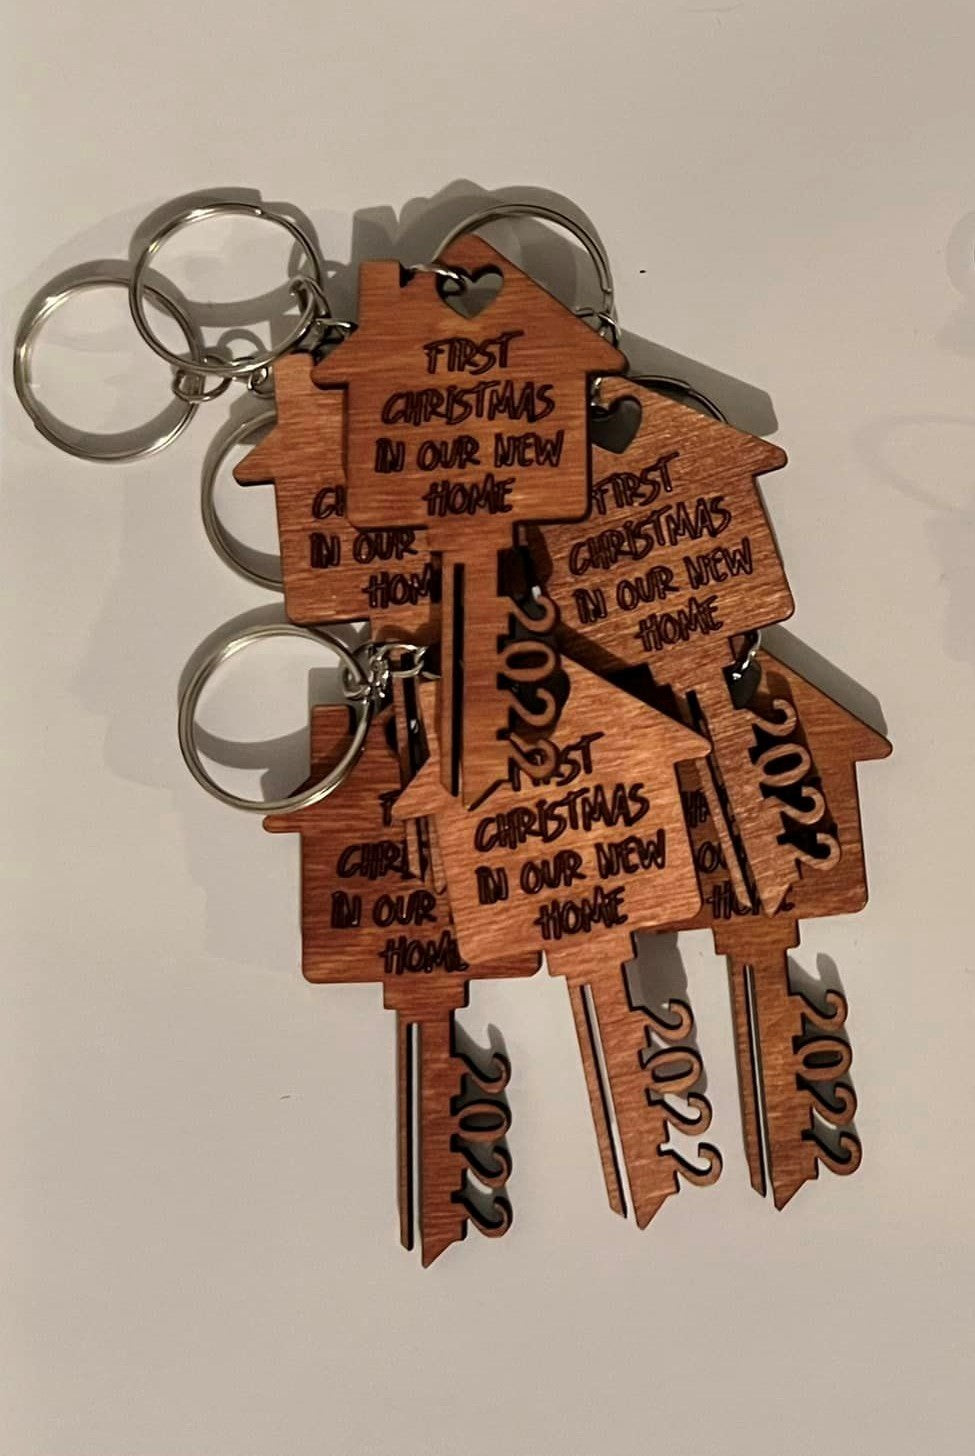 LASER CUT KEYCHAIN "FIRST CHRISTMAS IN OUR NEW HOME 2022"